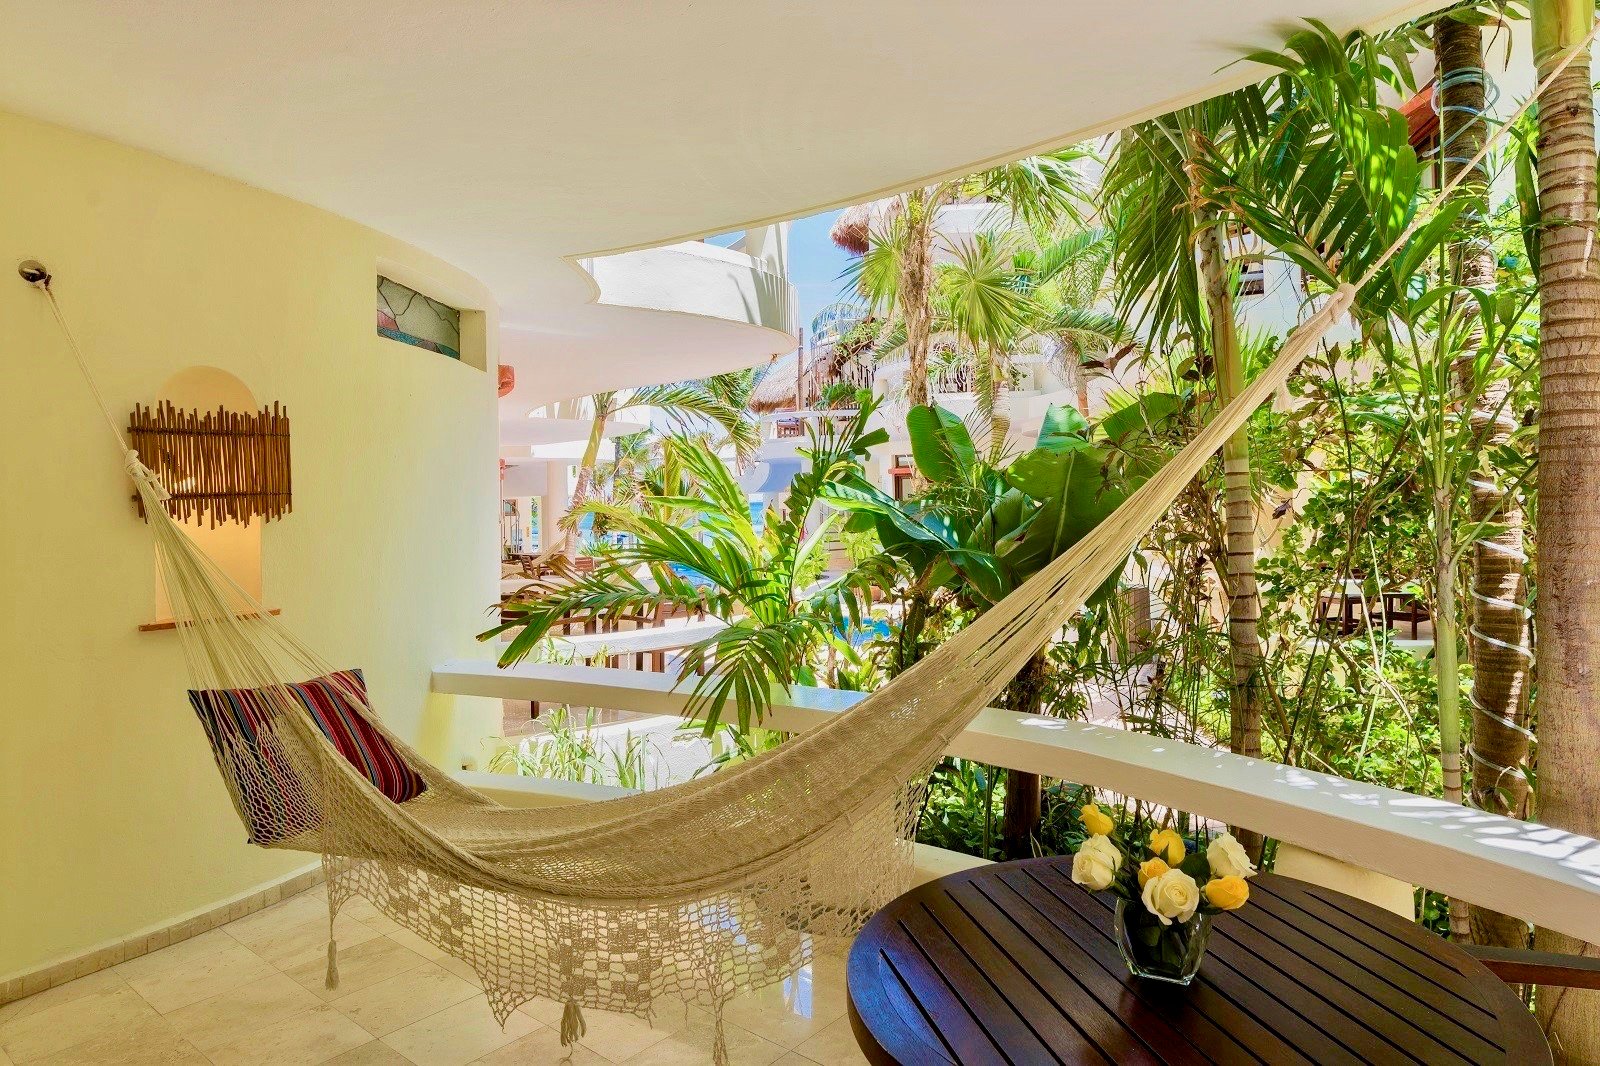 Private relaxing area.